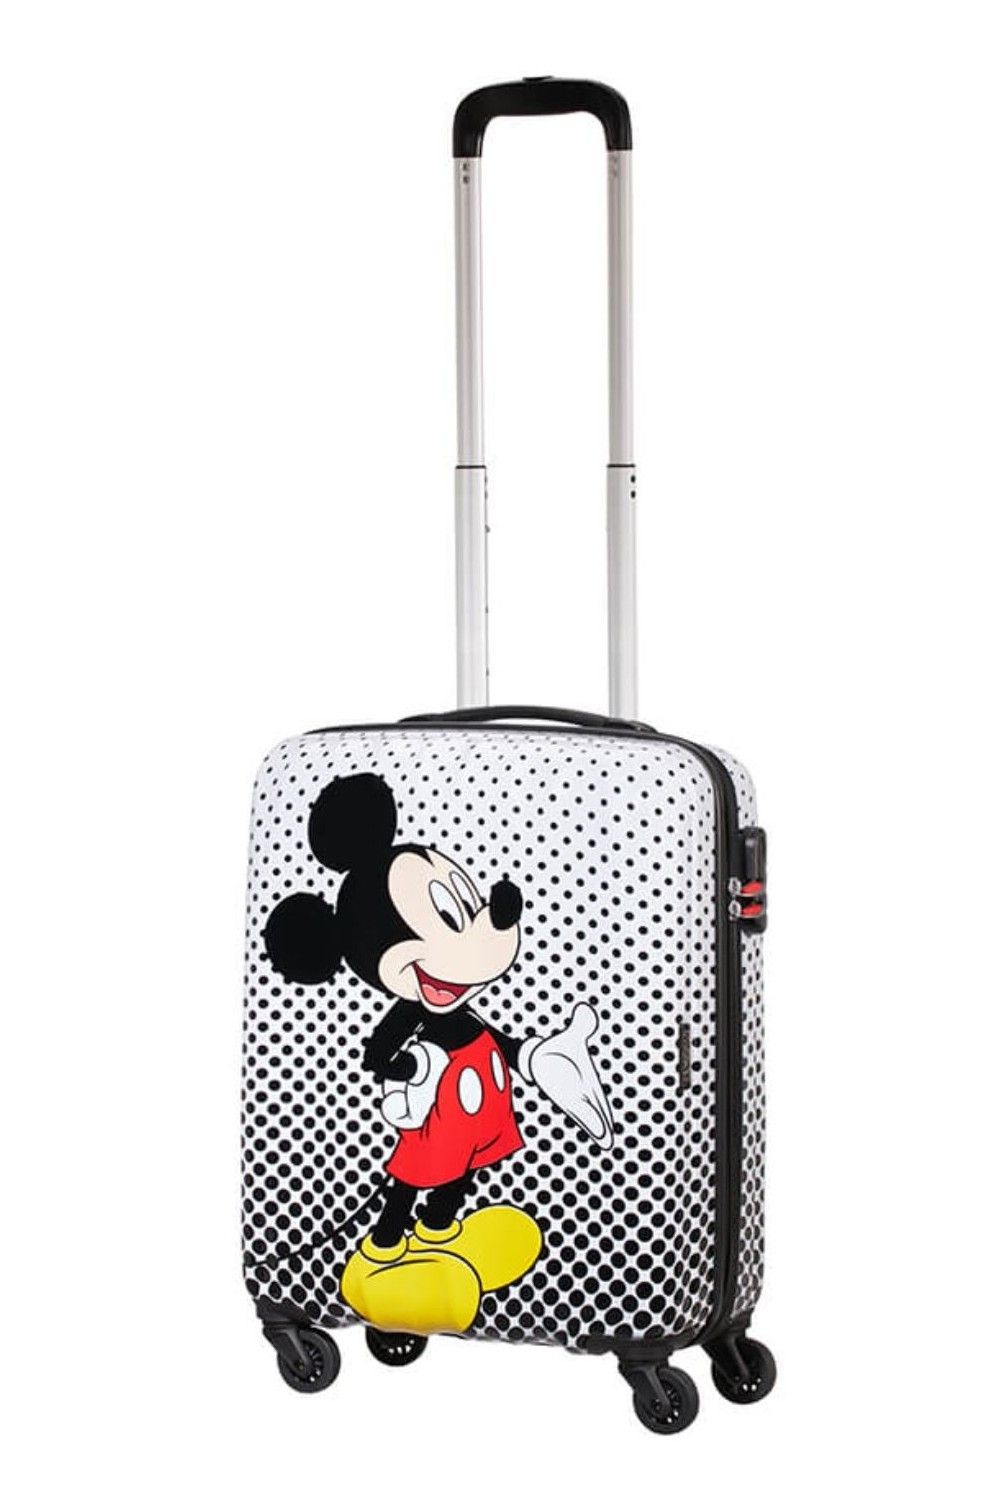 AT Mickey Polka Dot 55x40x20cm carry-on luggage